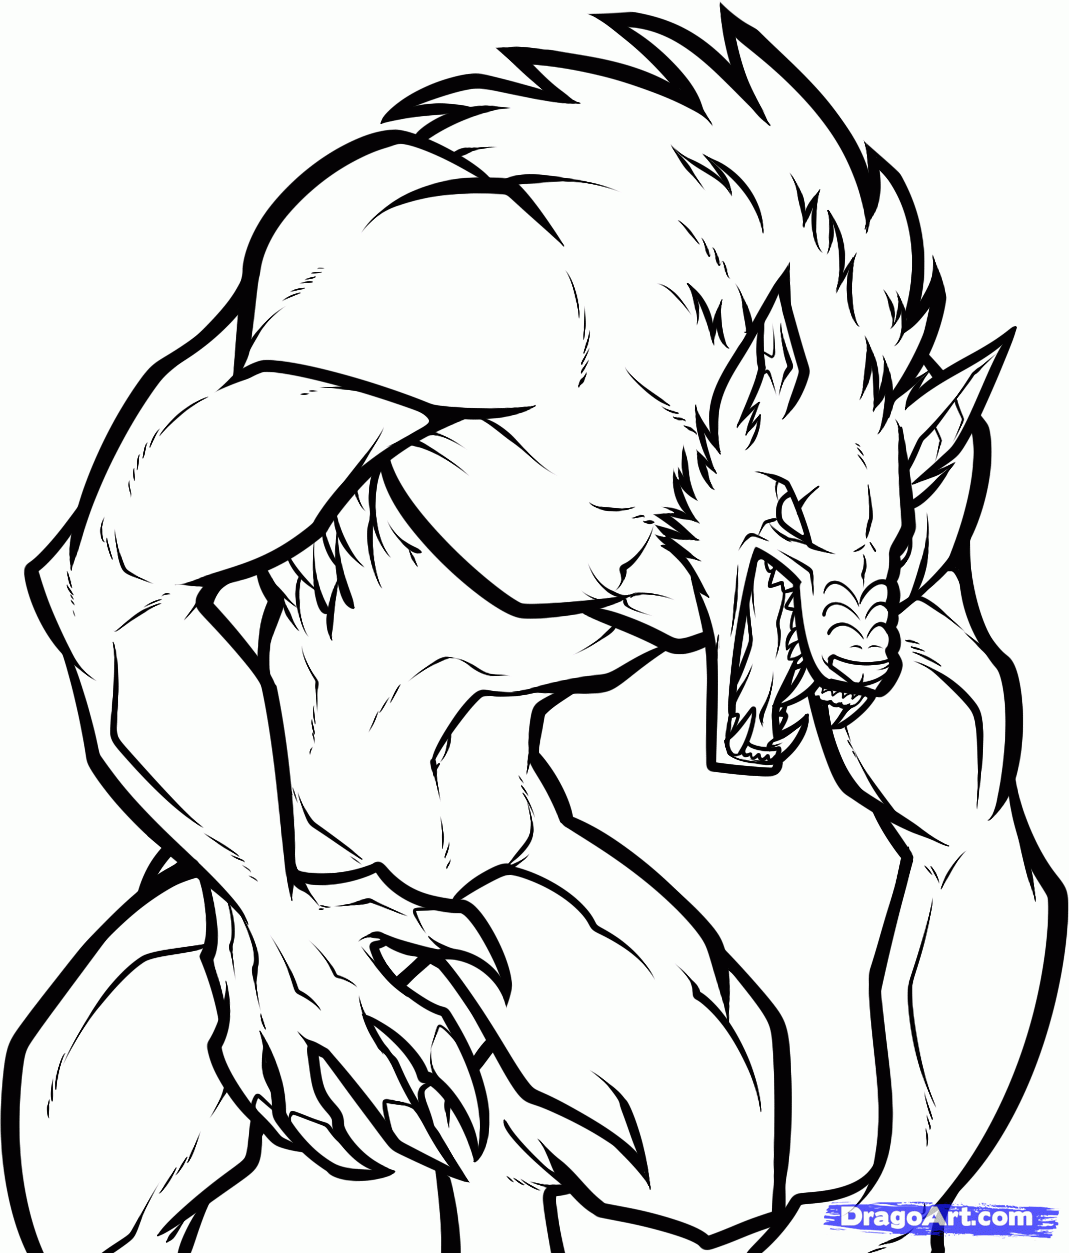 Werewolf Coloring - Coloring Pages for Kids and for Adults